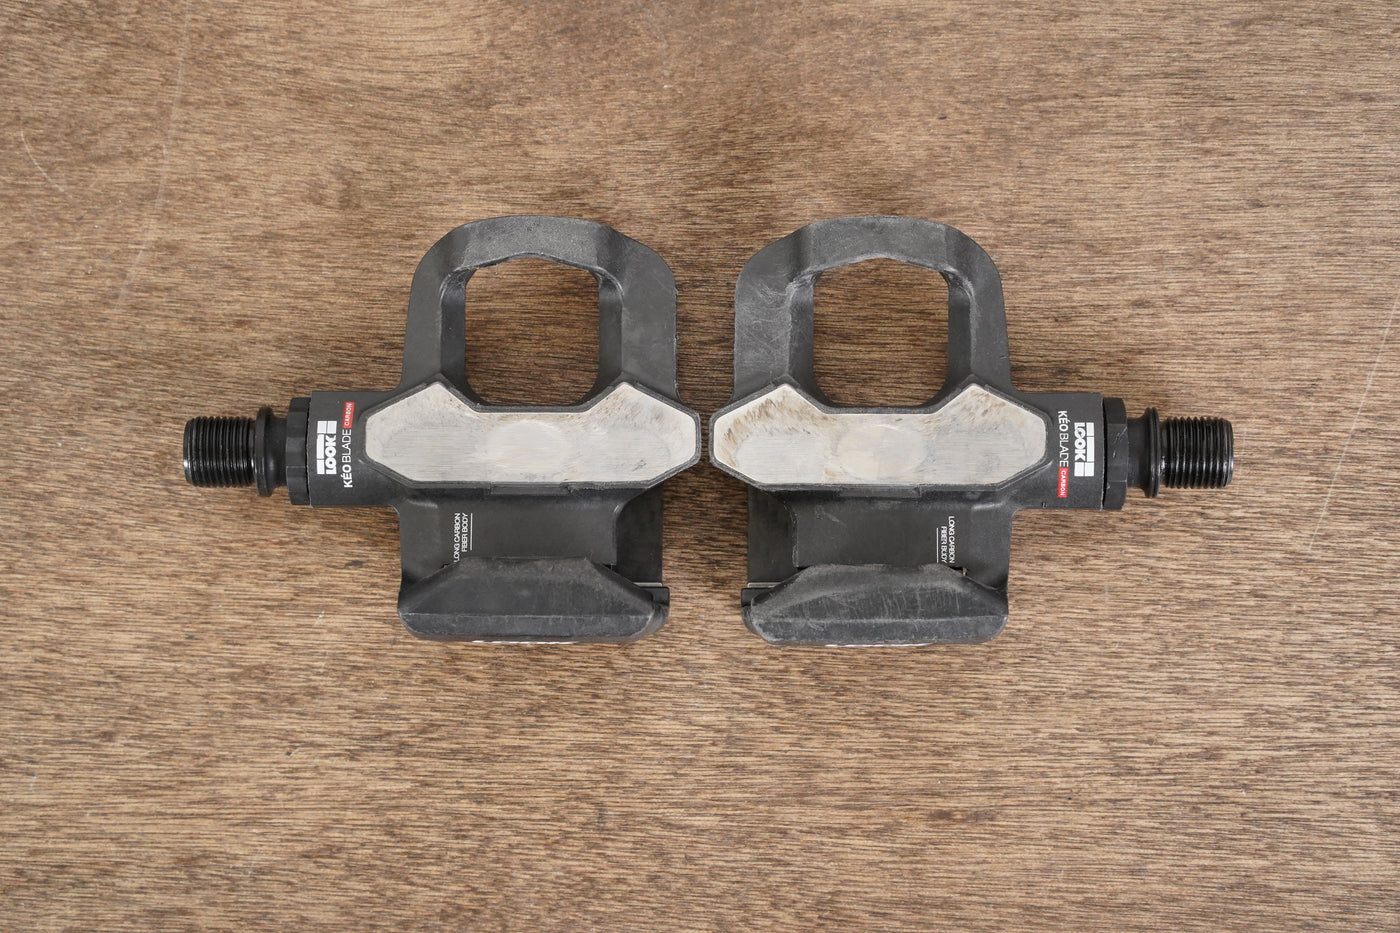 LOOK Keo Blade Carbon Clipless Road Pedals 227g